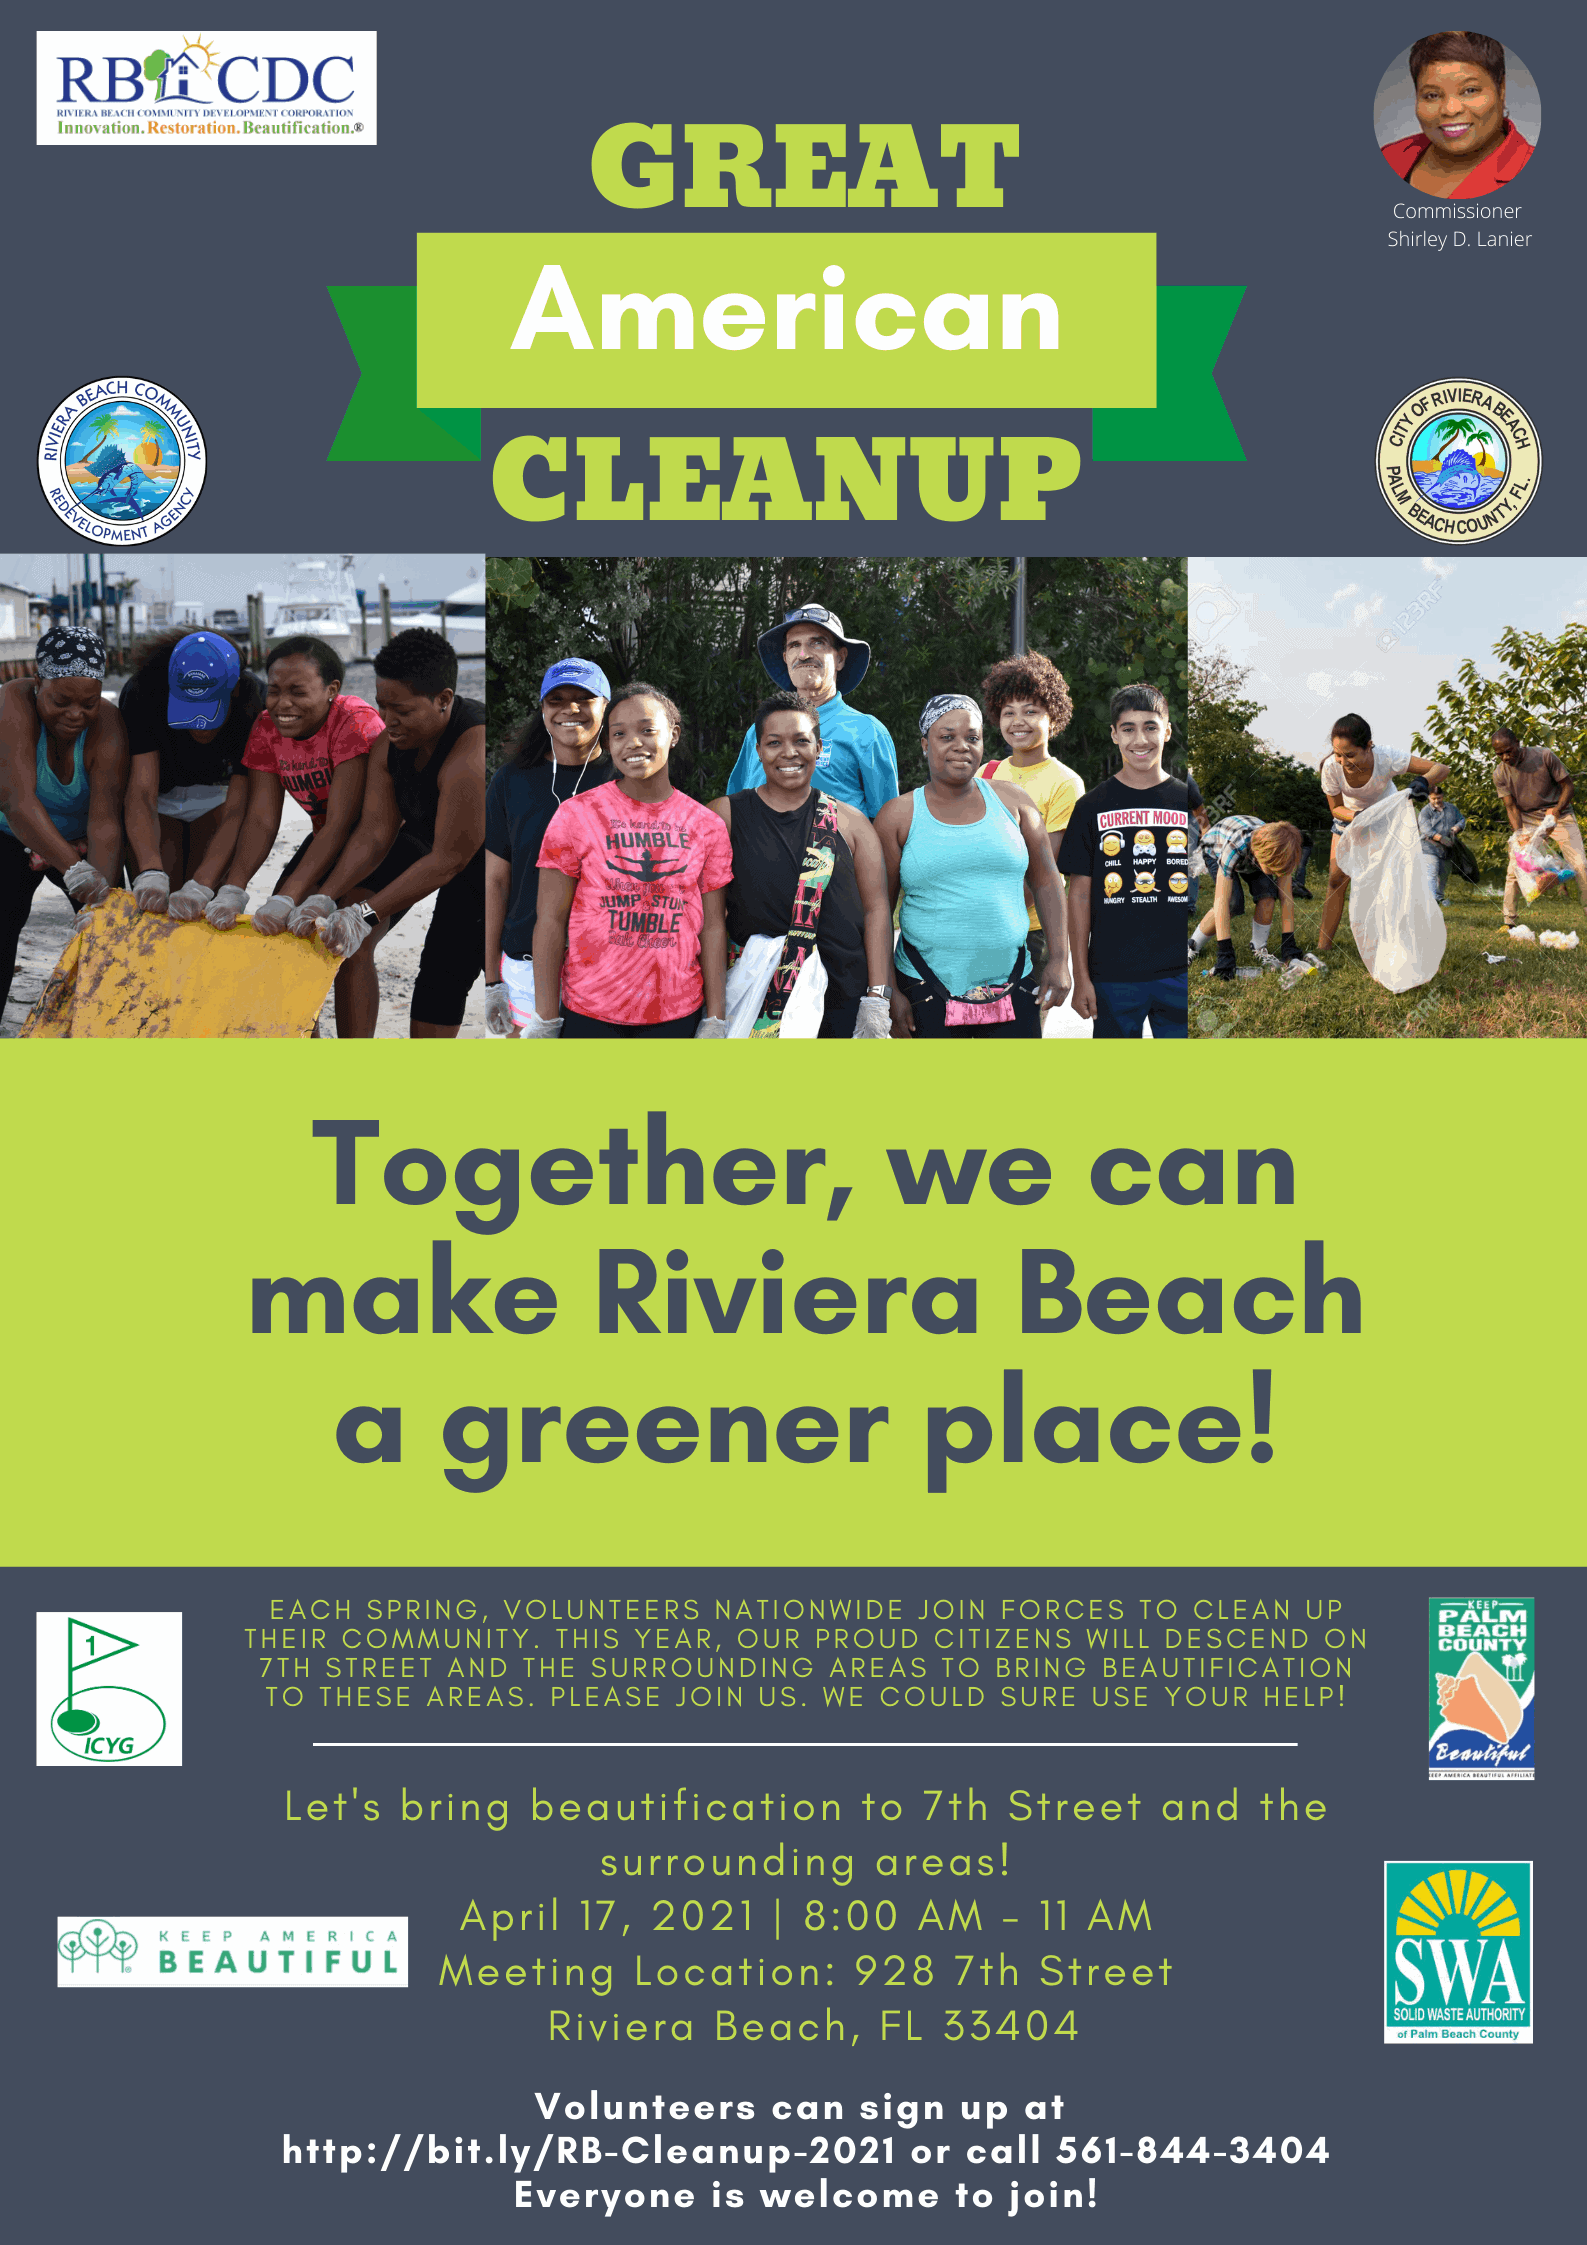 Great American Cleanup Riviera Beach